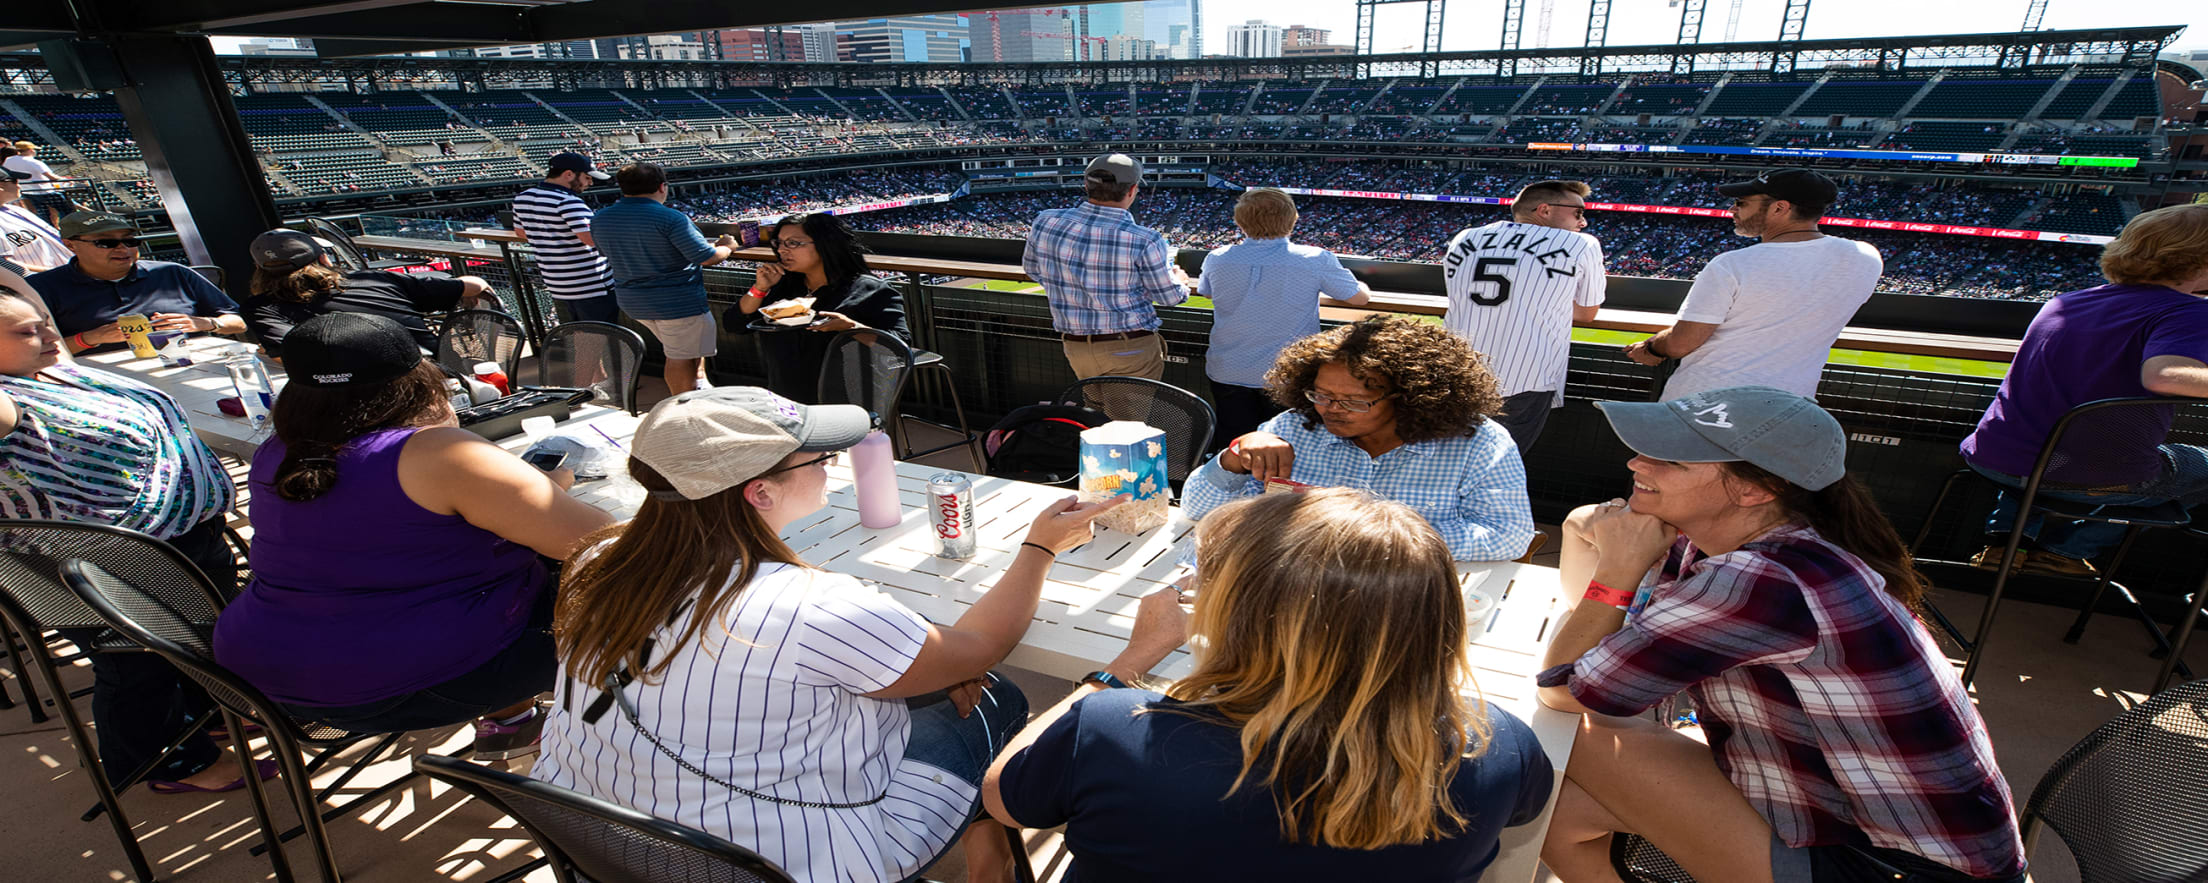 Coors Field to add rooftop deck for next season